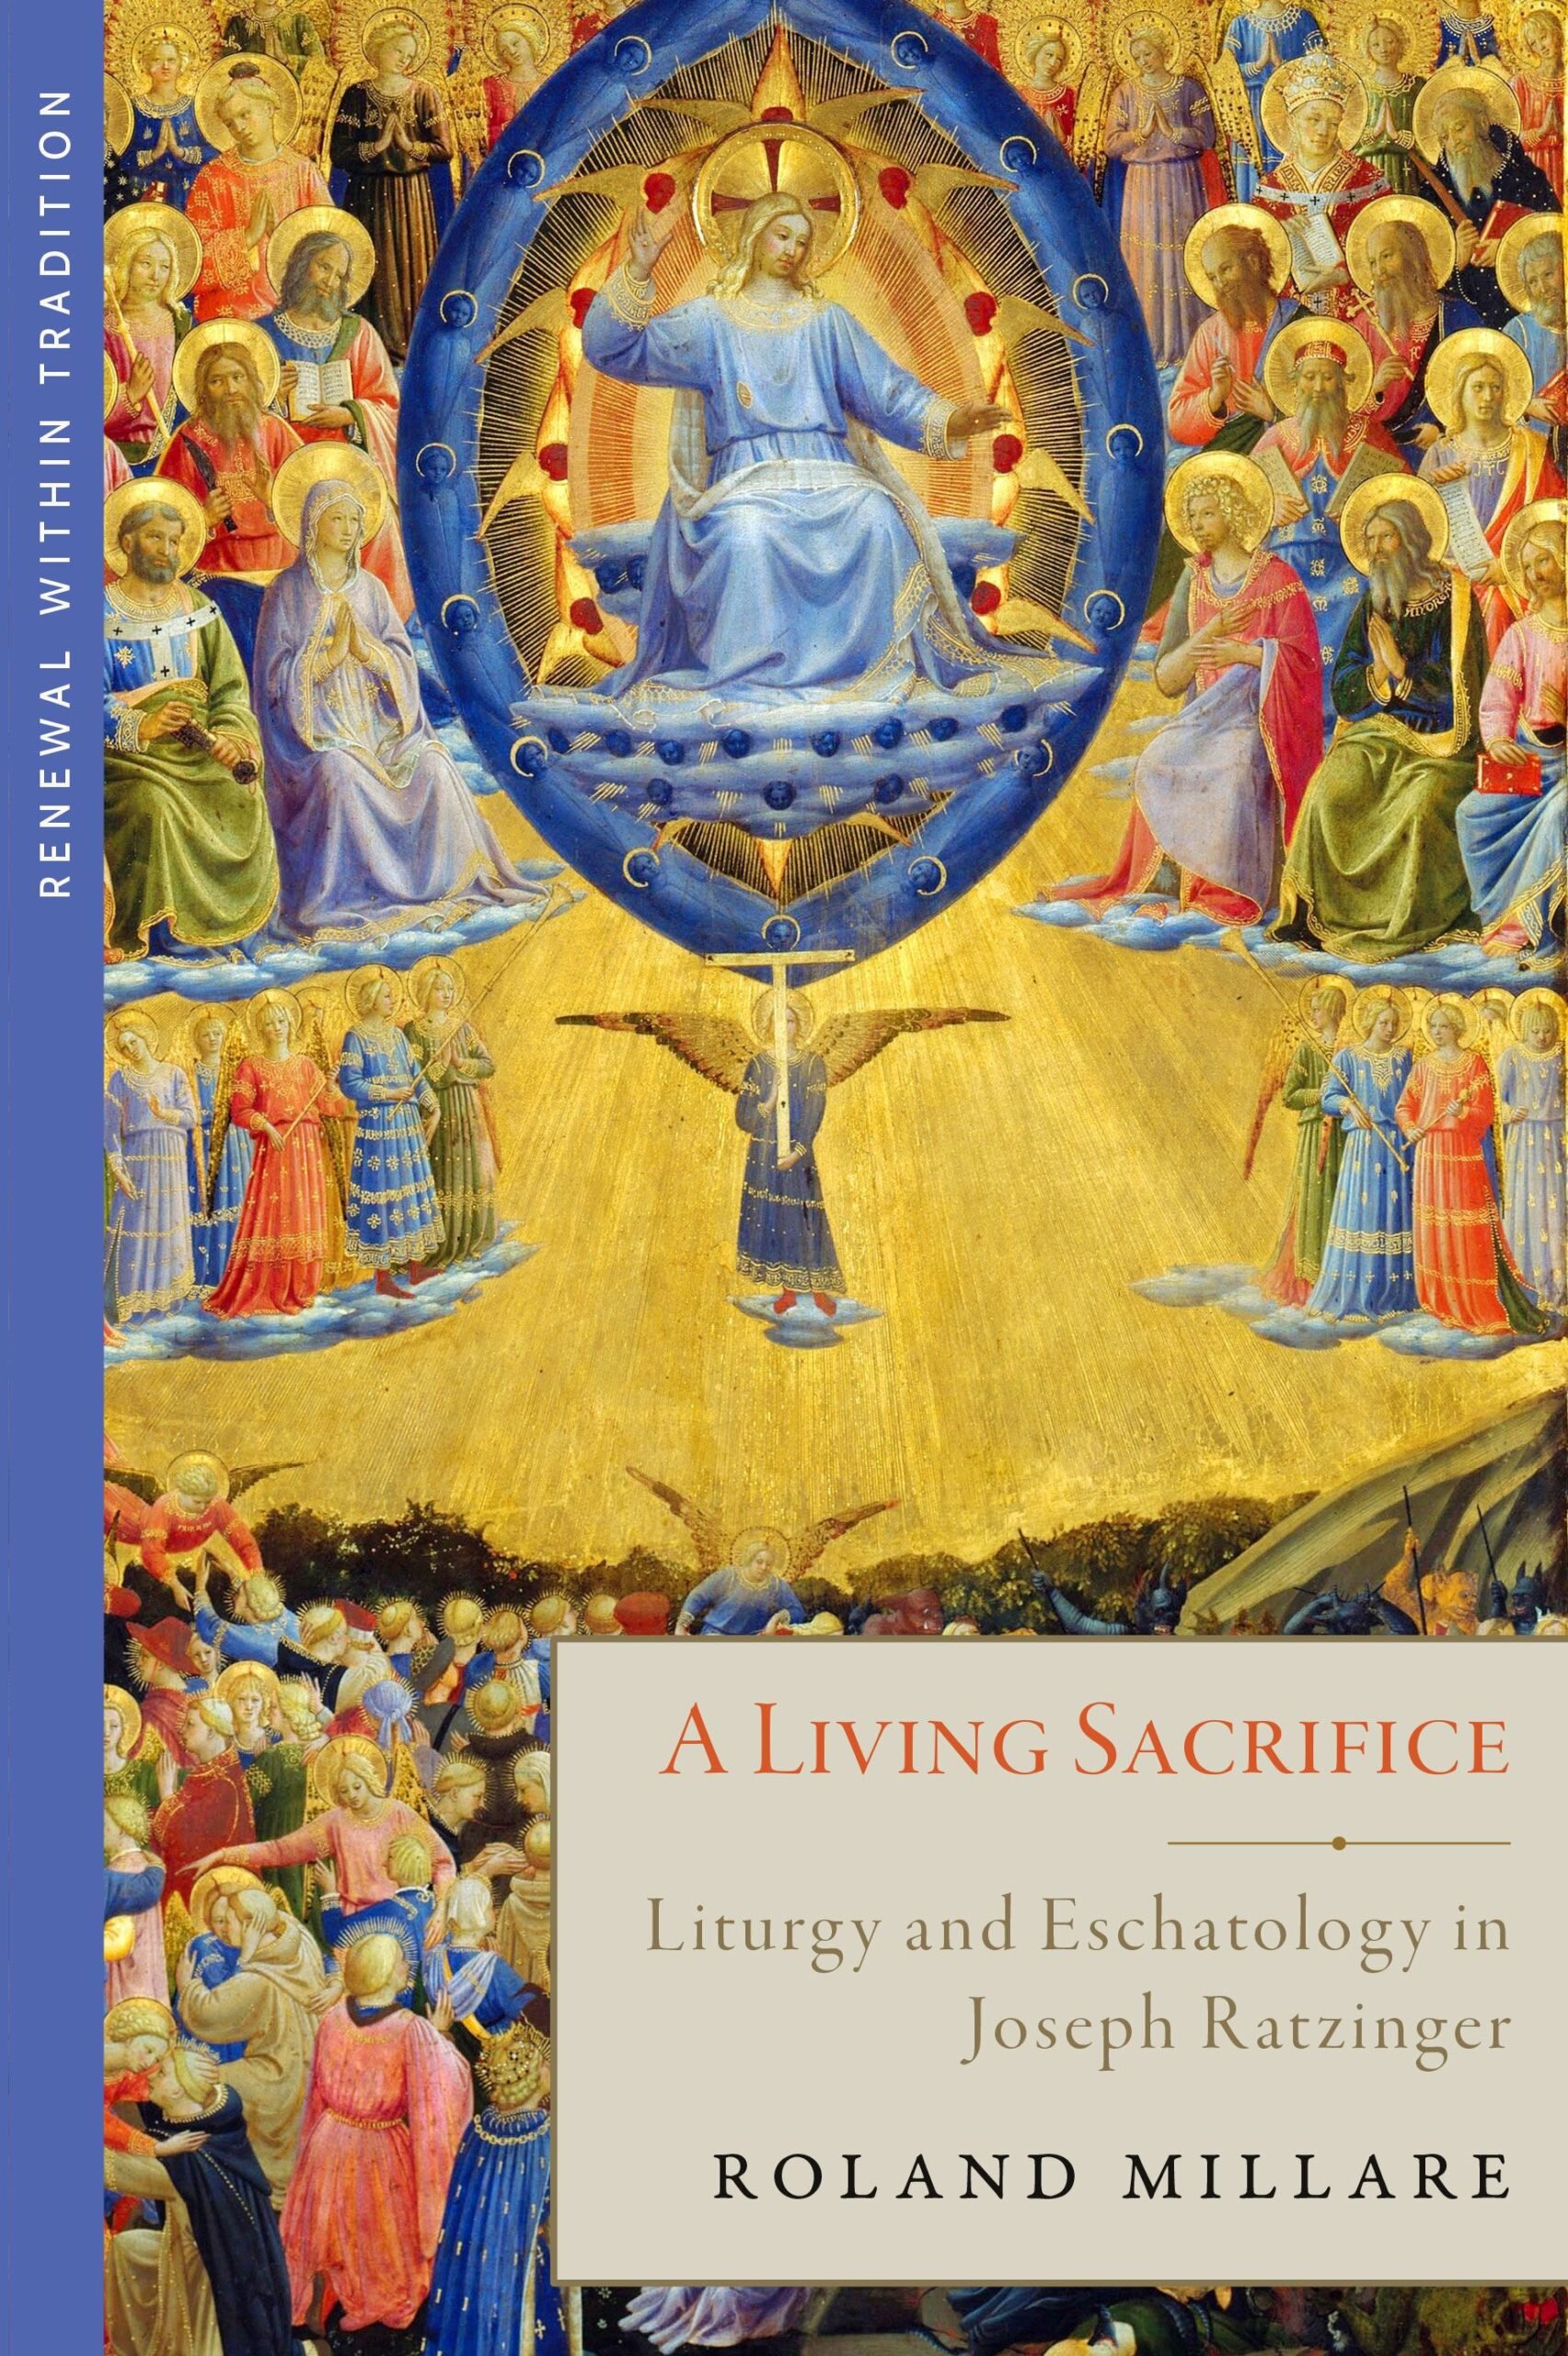 A Living Sacrifice: Liturgy and Eschatology in Joseph Ratzinger (Renewal within Tradition)